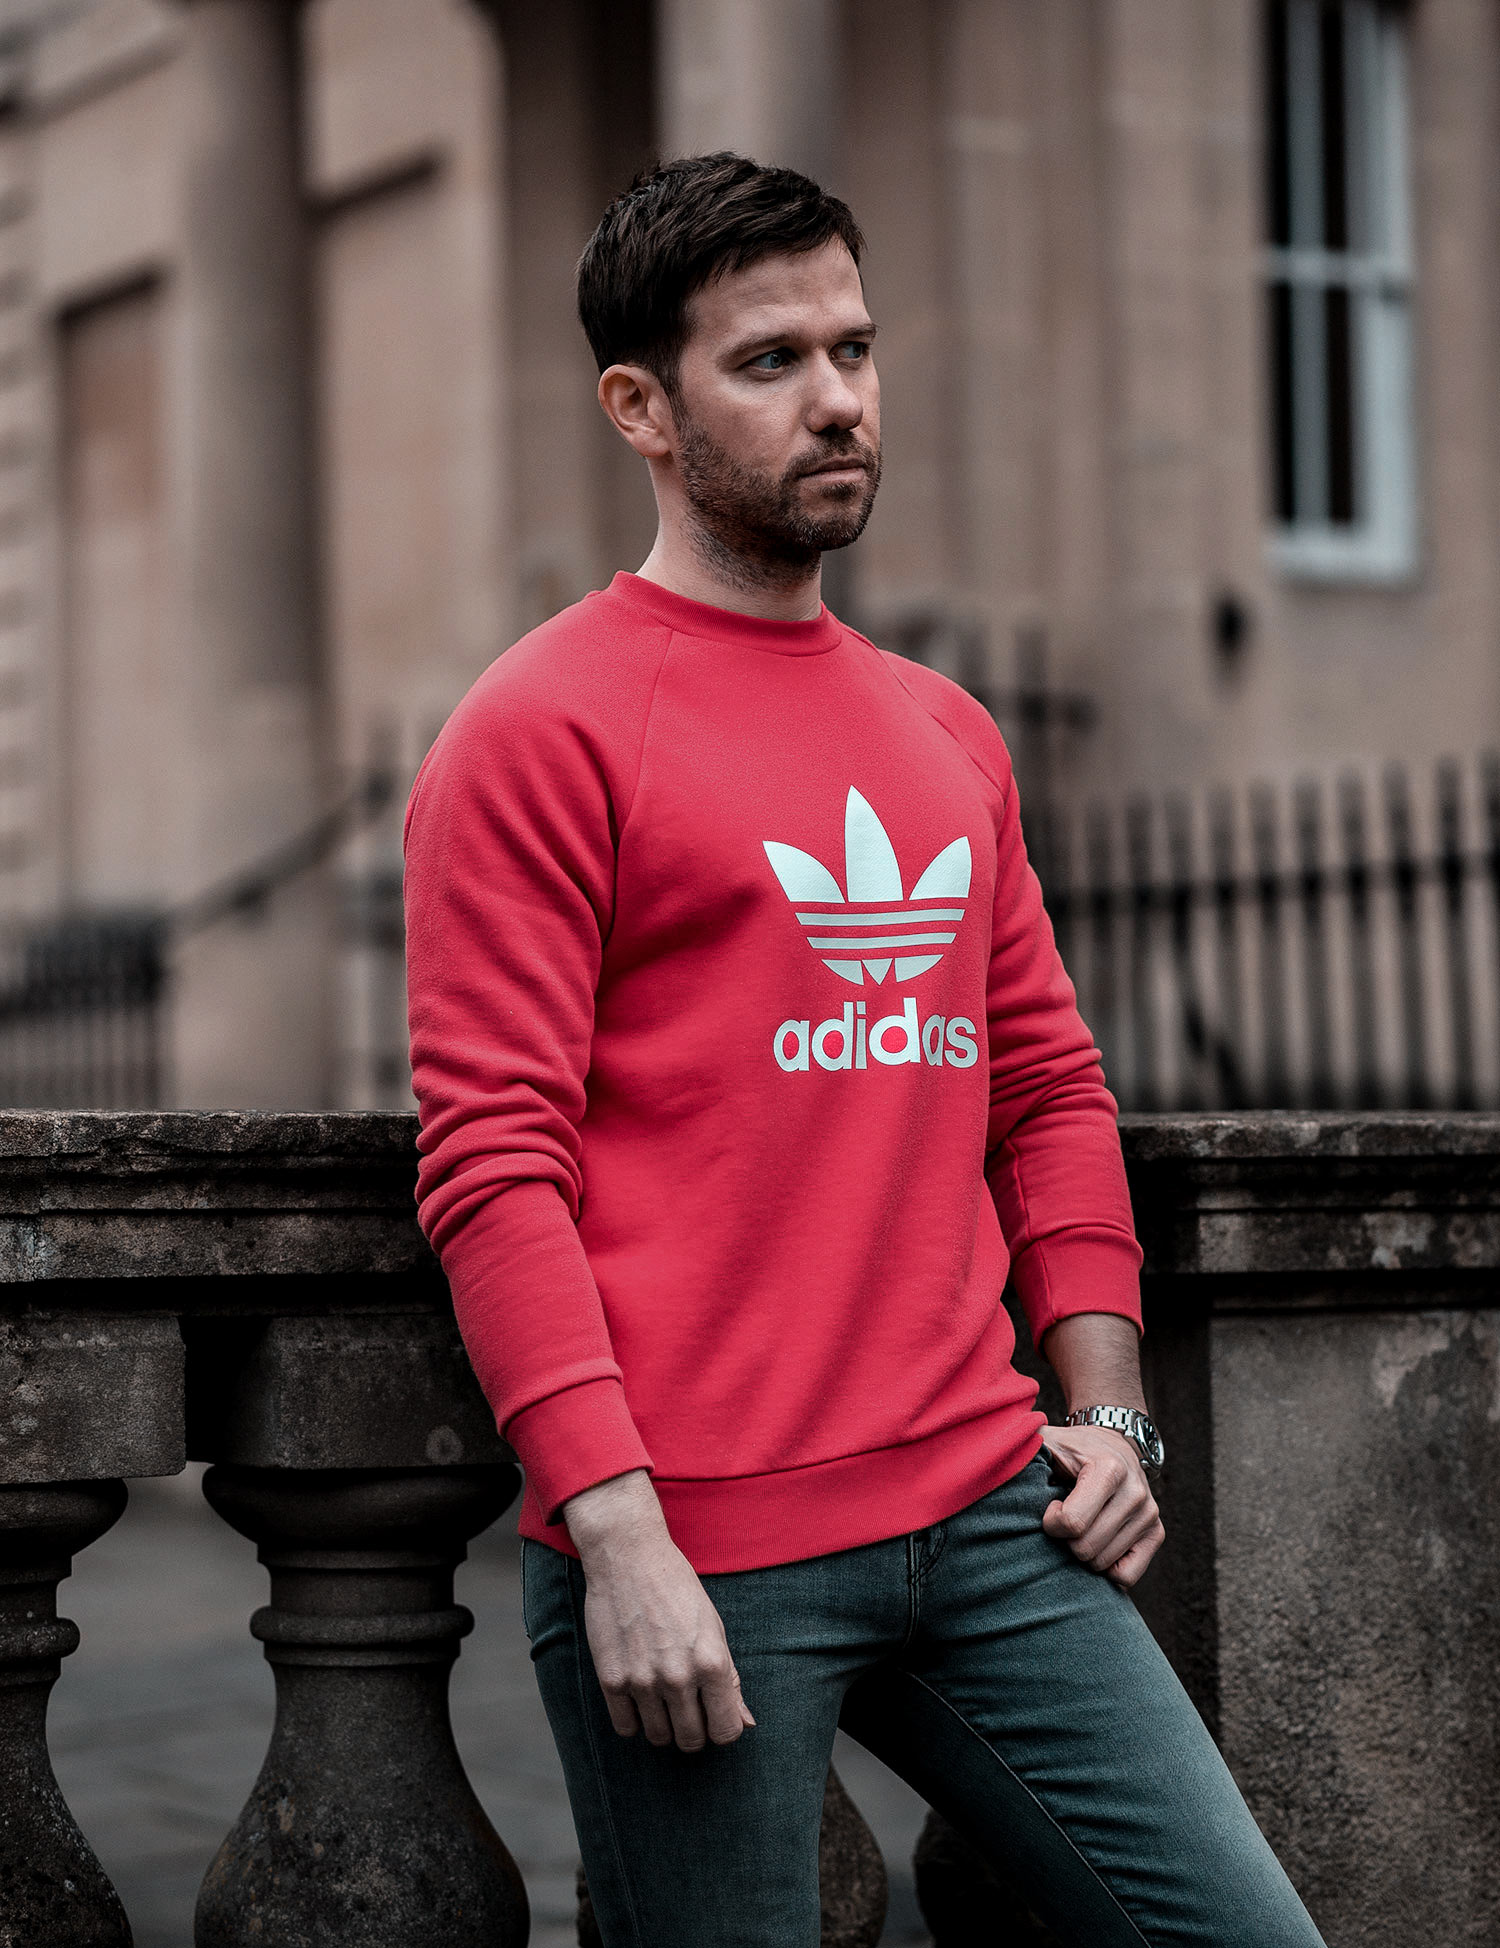 Red Adidas Sweatshirt And Grey Skinny Jeans Street Style Outfit - Average Guy